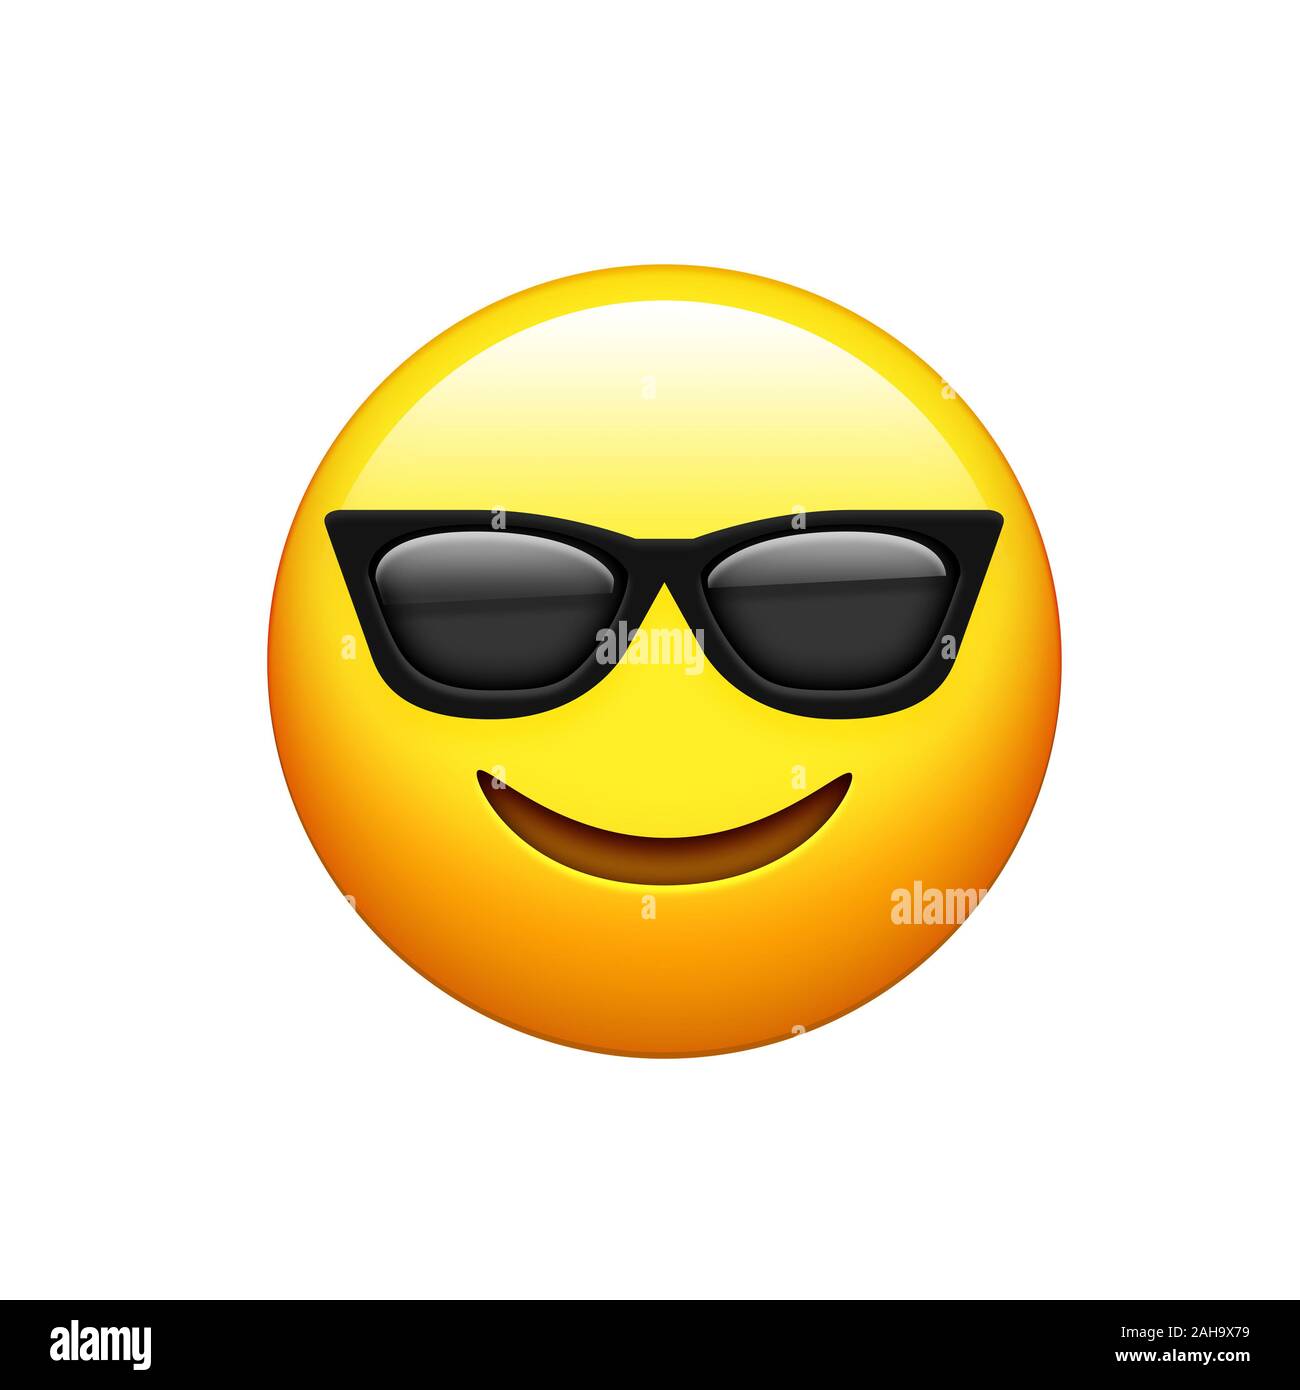 The emoji yellow face with black sunglass and smile icon Stock Photo